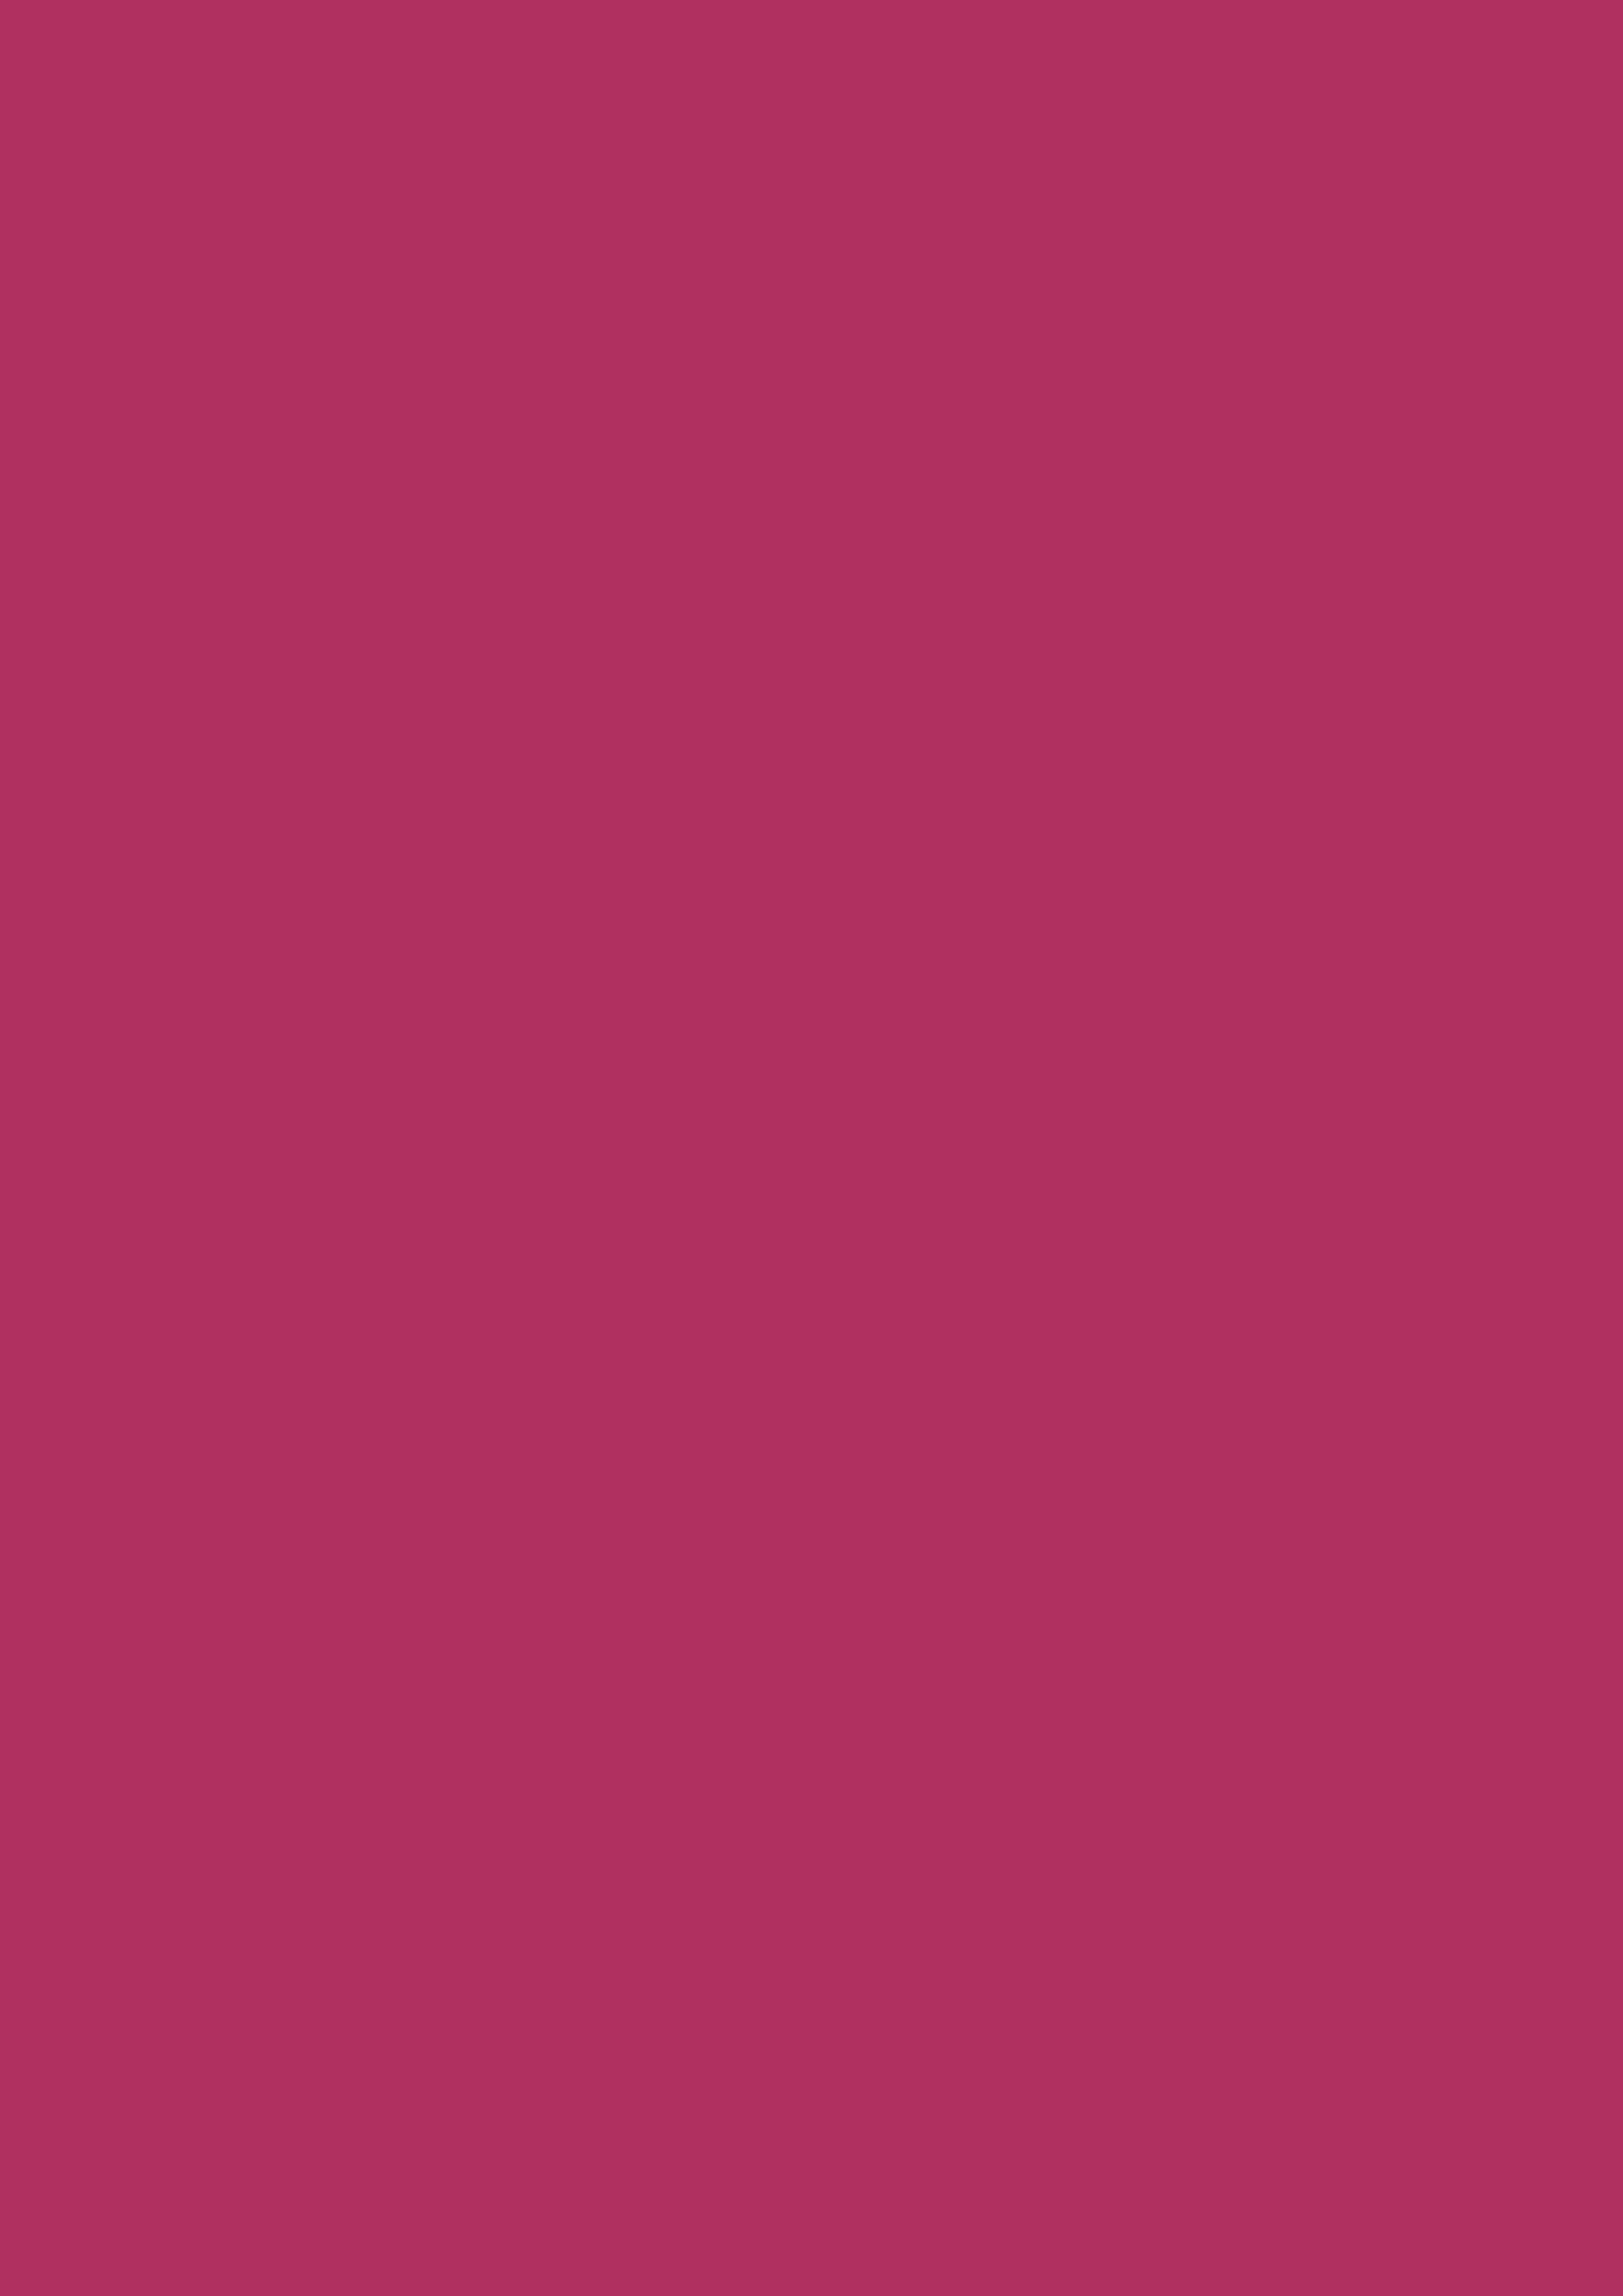 2480x3508 Rich Maroon Solid Color Background